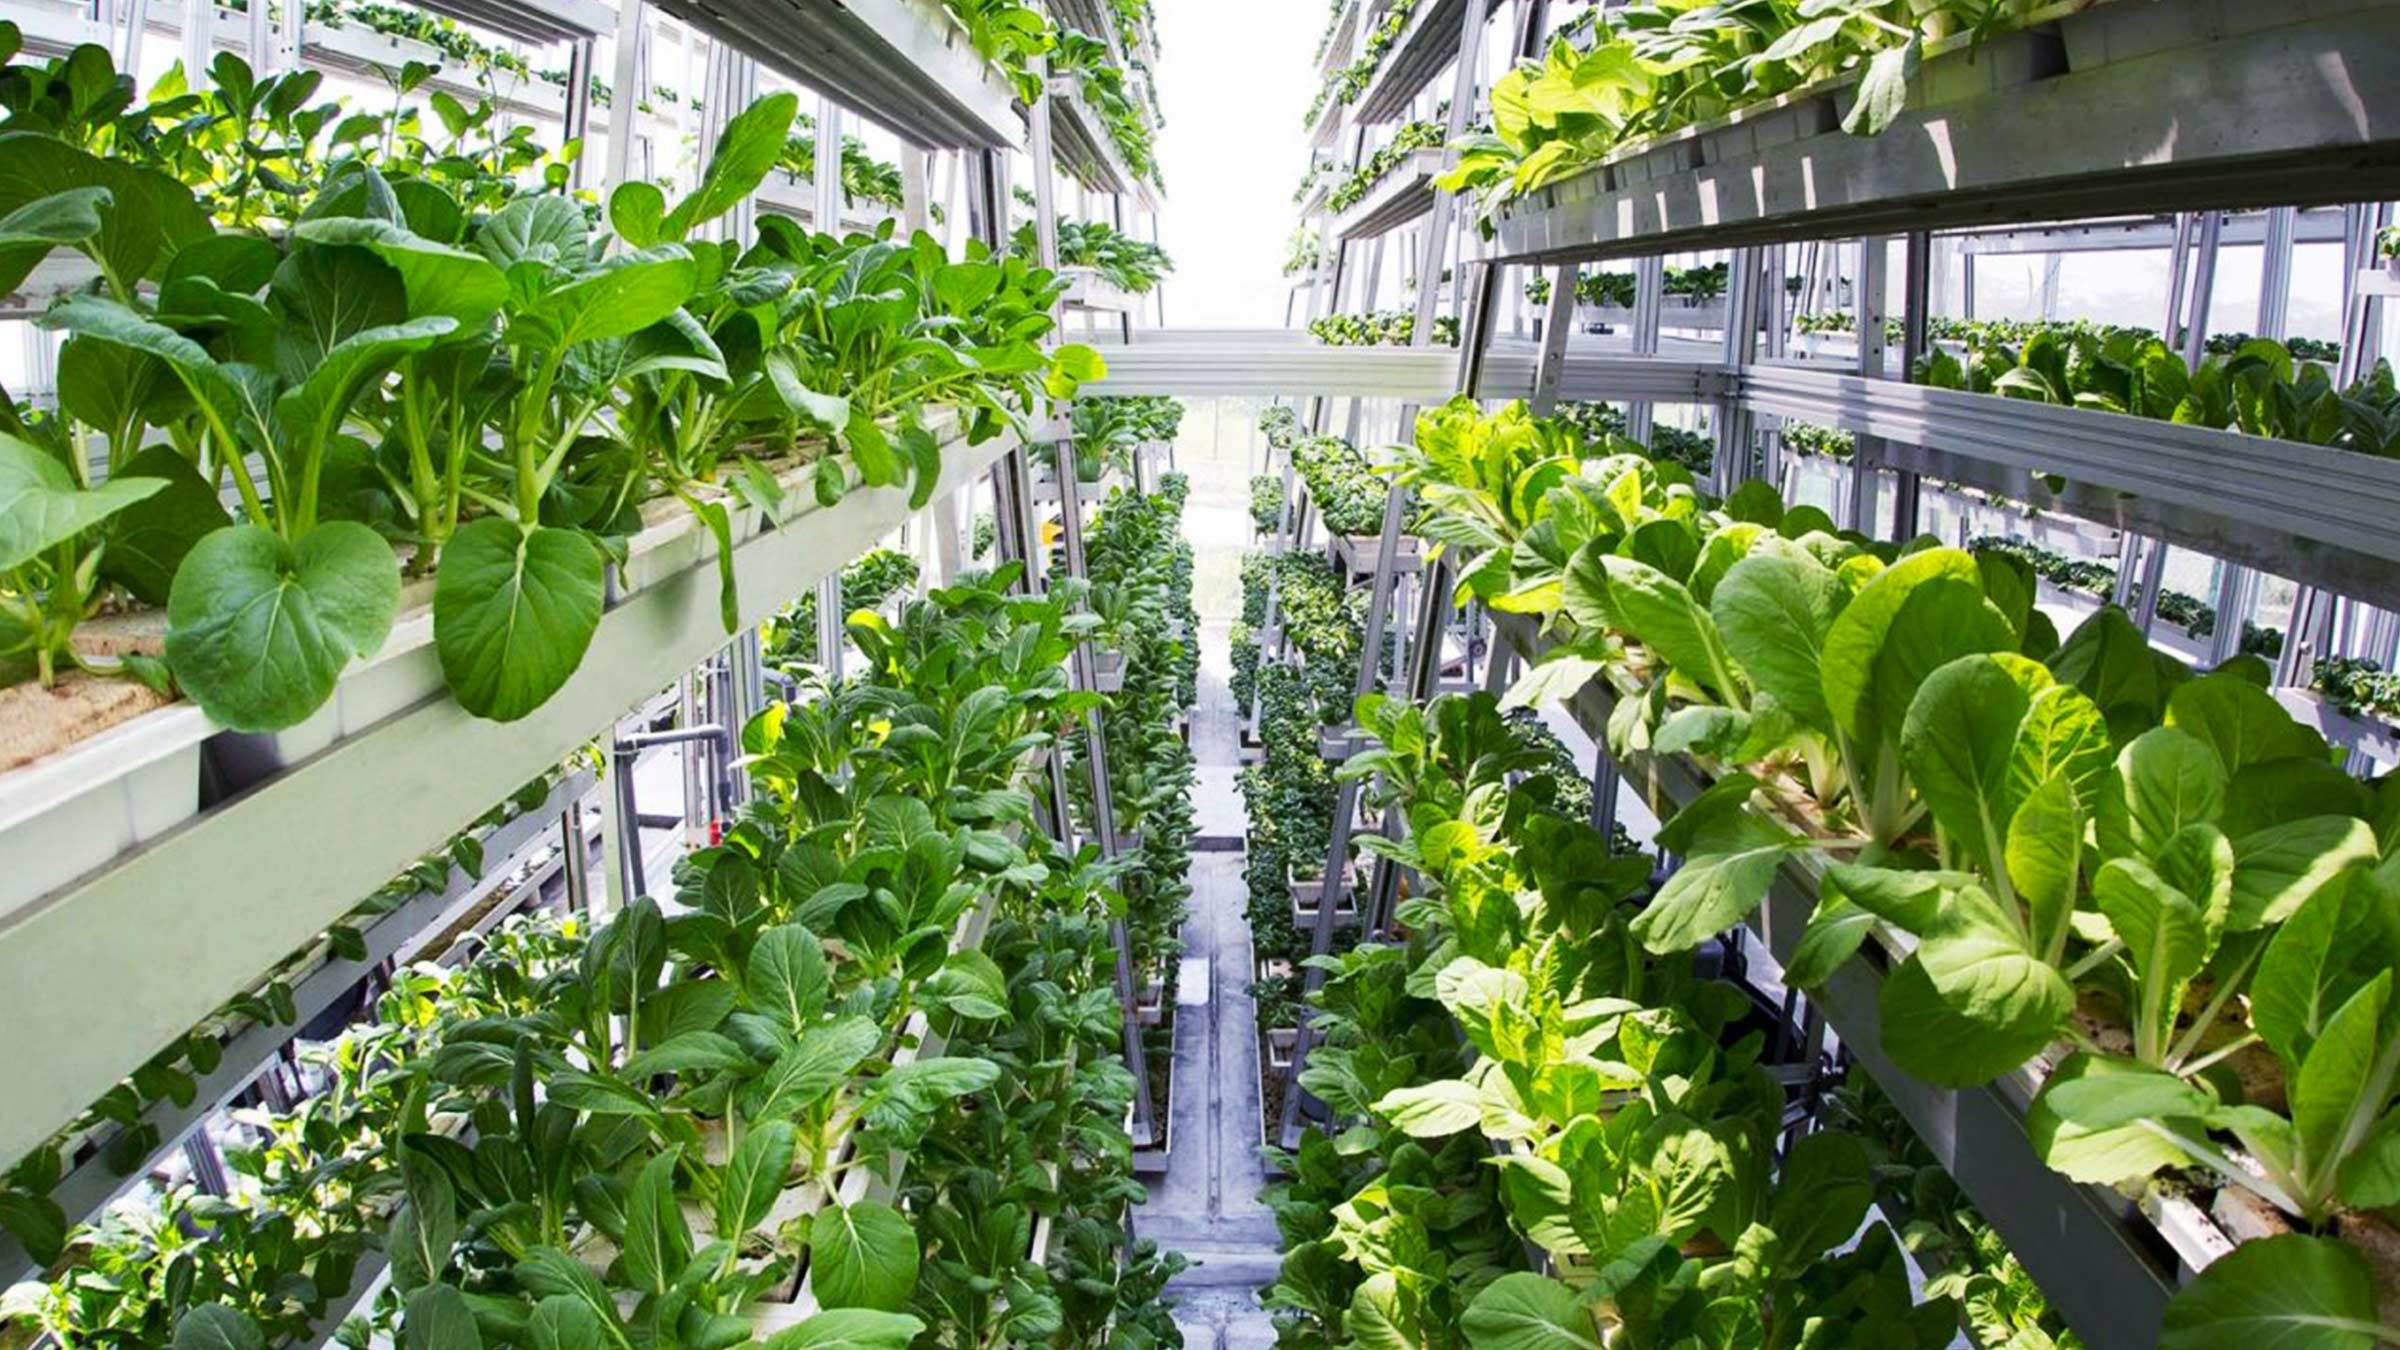 Vertical Farming, a growing industry?